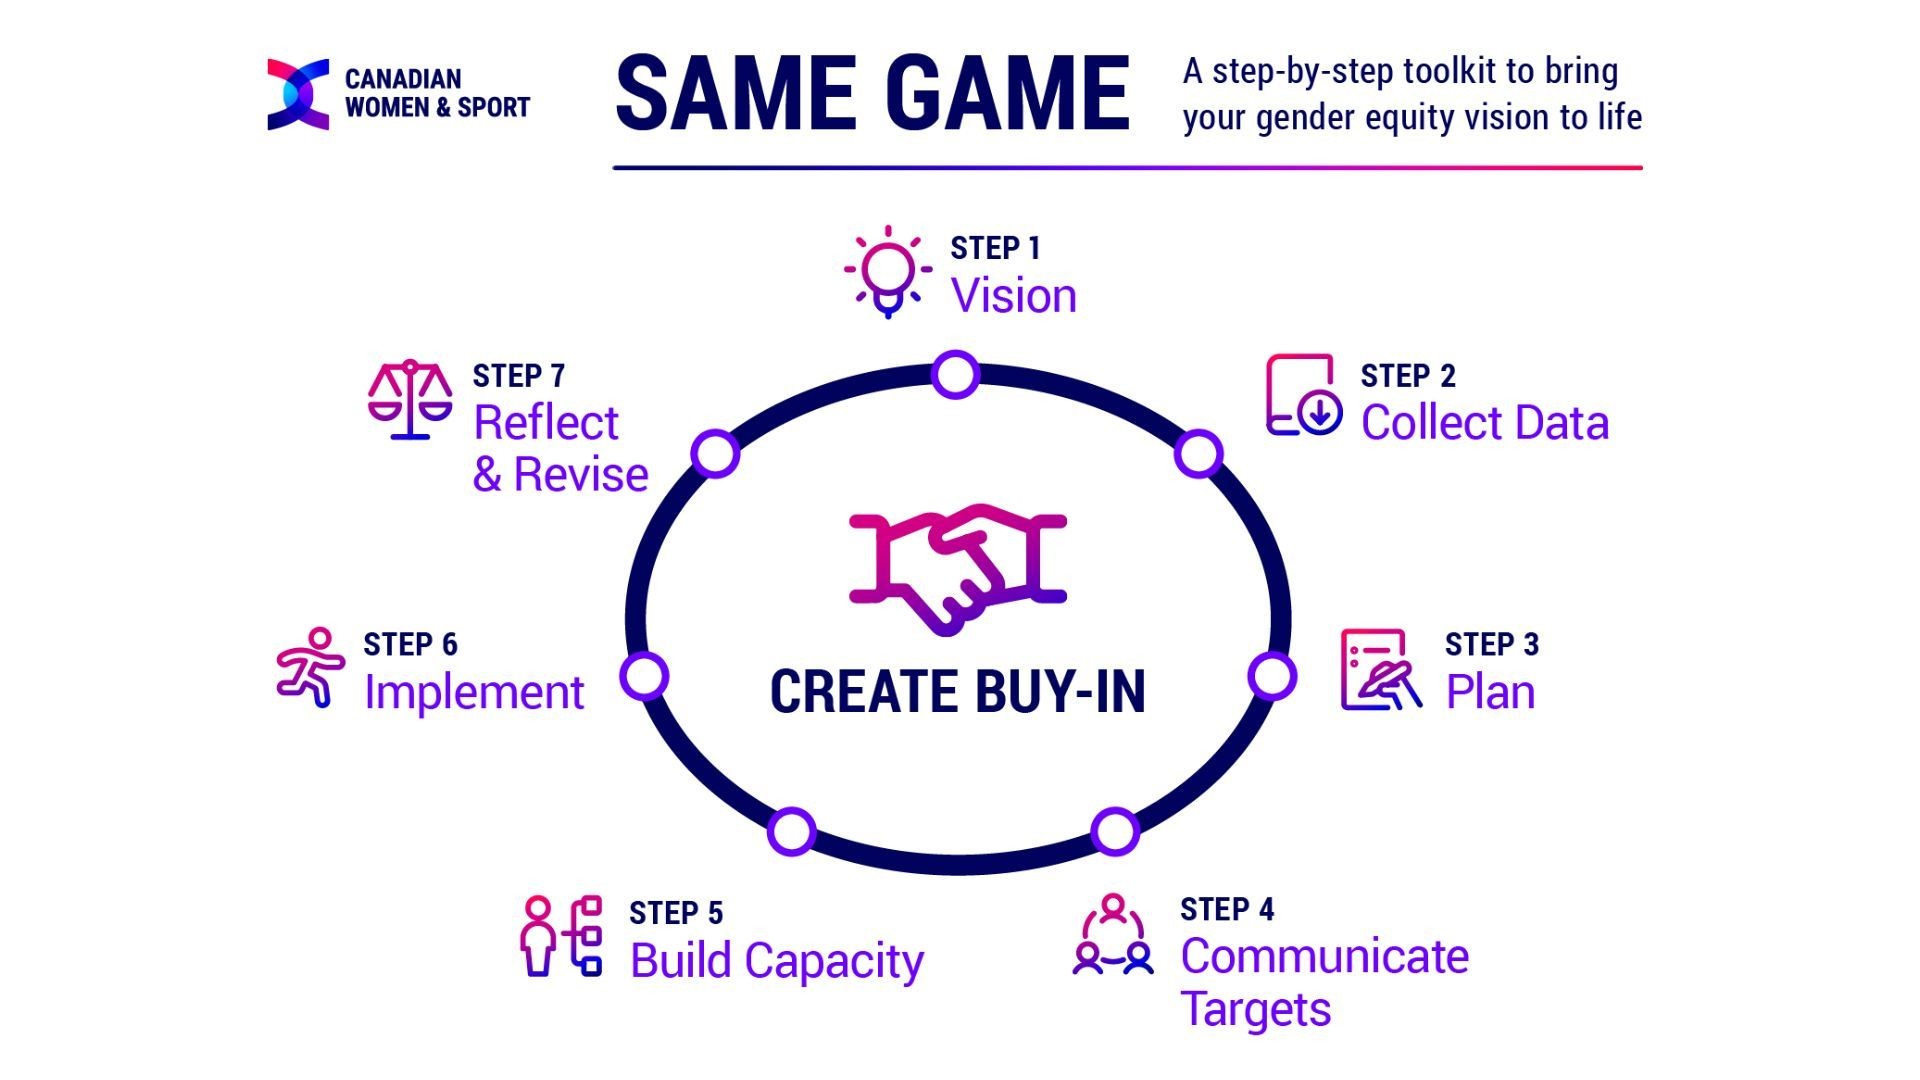 Same Game: A Step-By-Step Toolkit to Bring Your Gender Equality Vision to Life